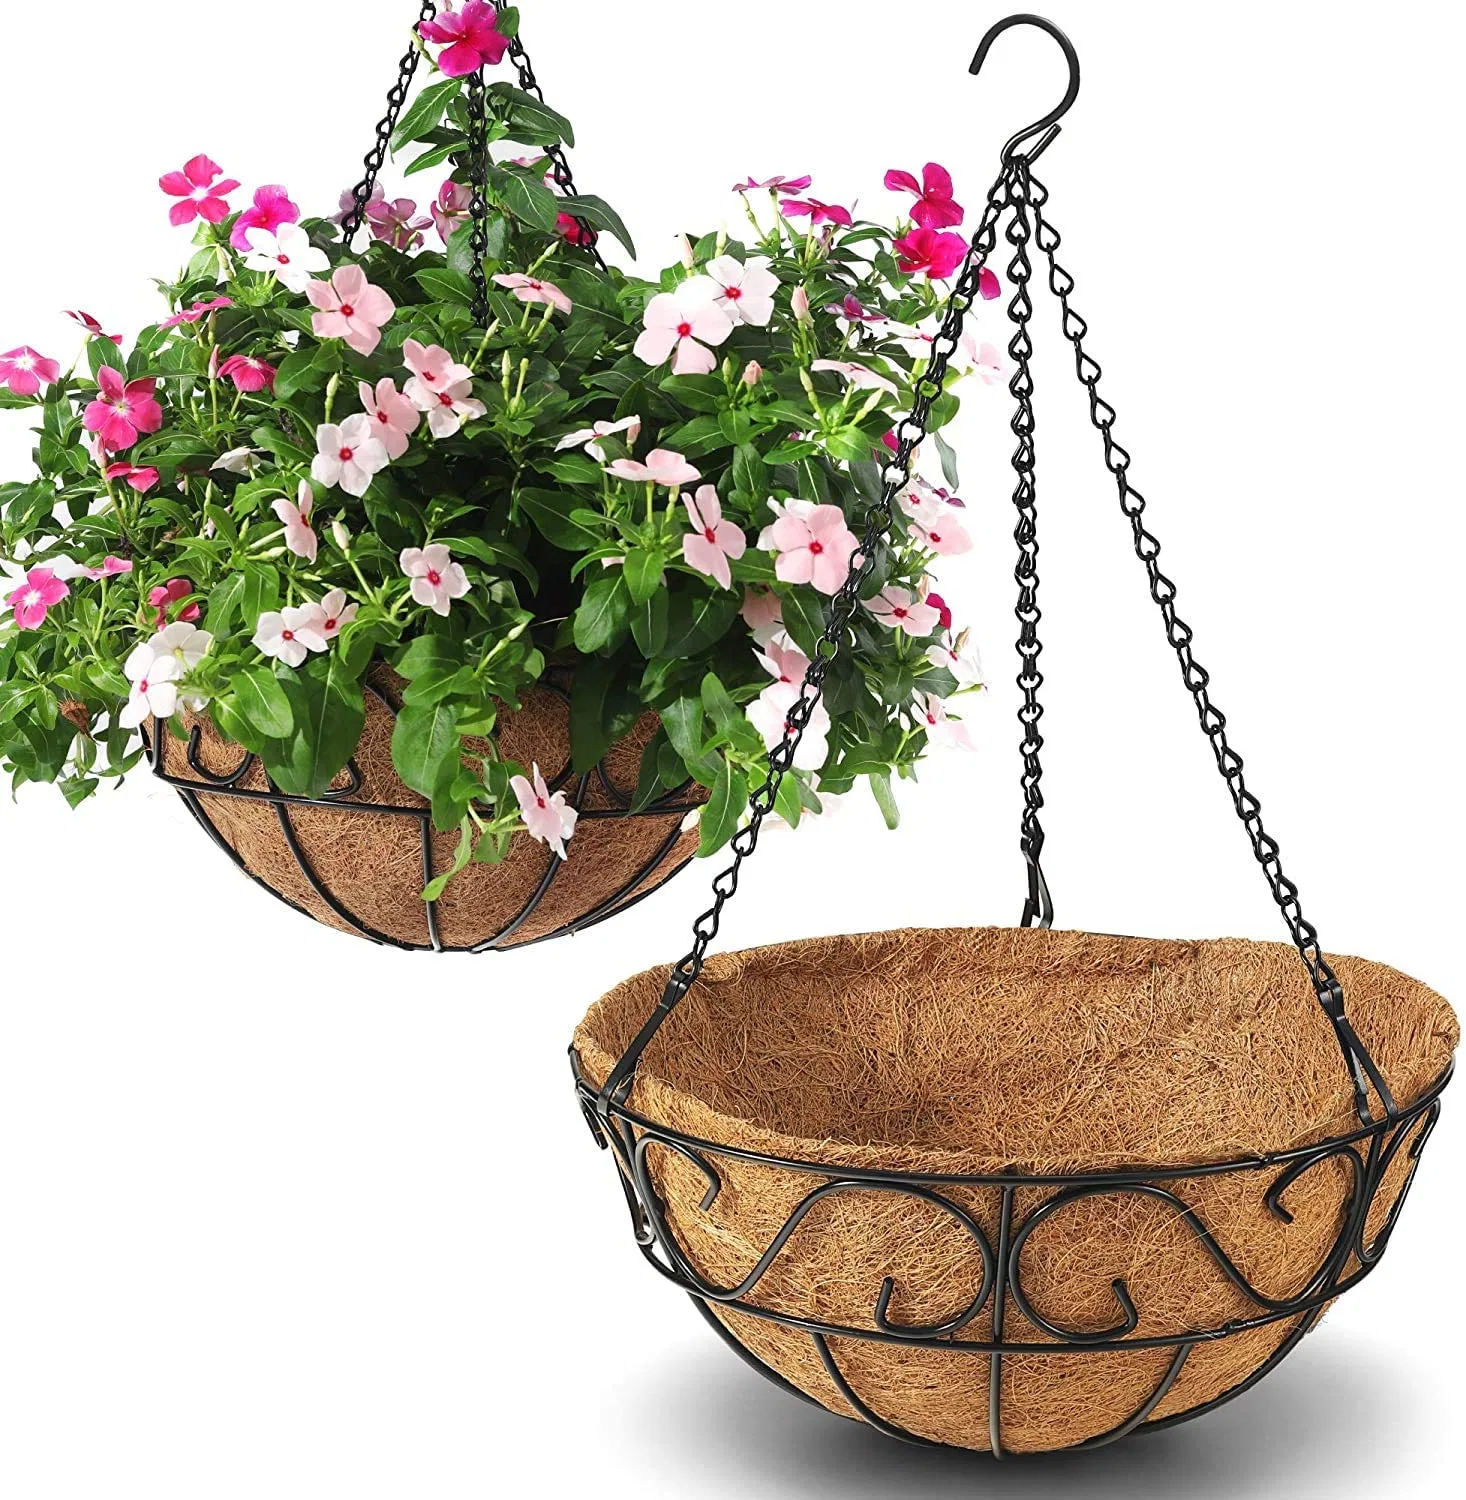 12 Inch Hanging Basket Wire Plant Holder Metal Flower Pots with Coco Coir Liners